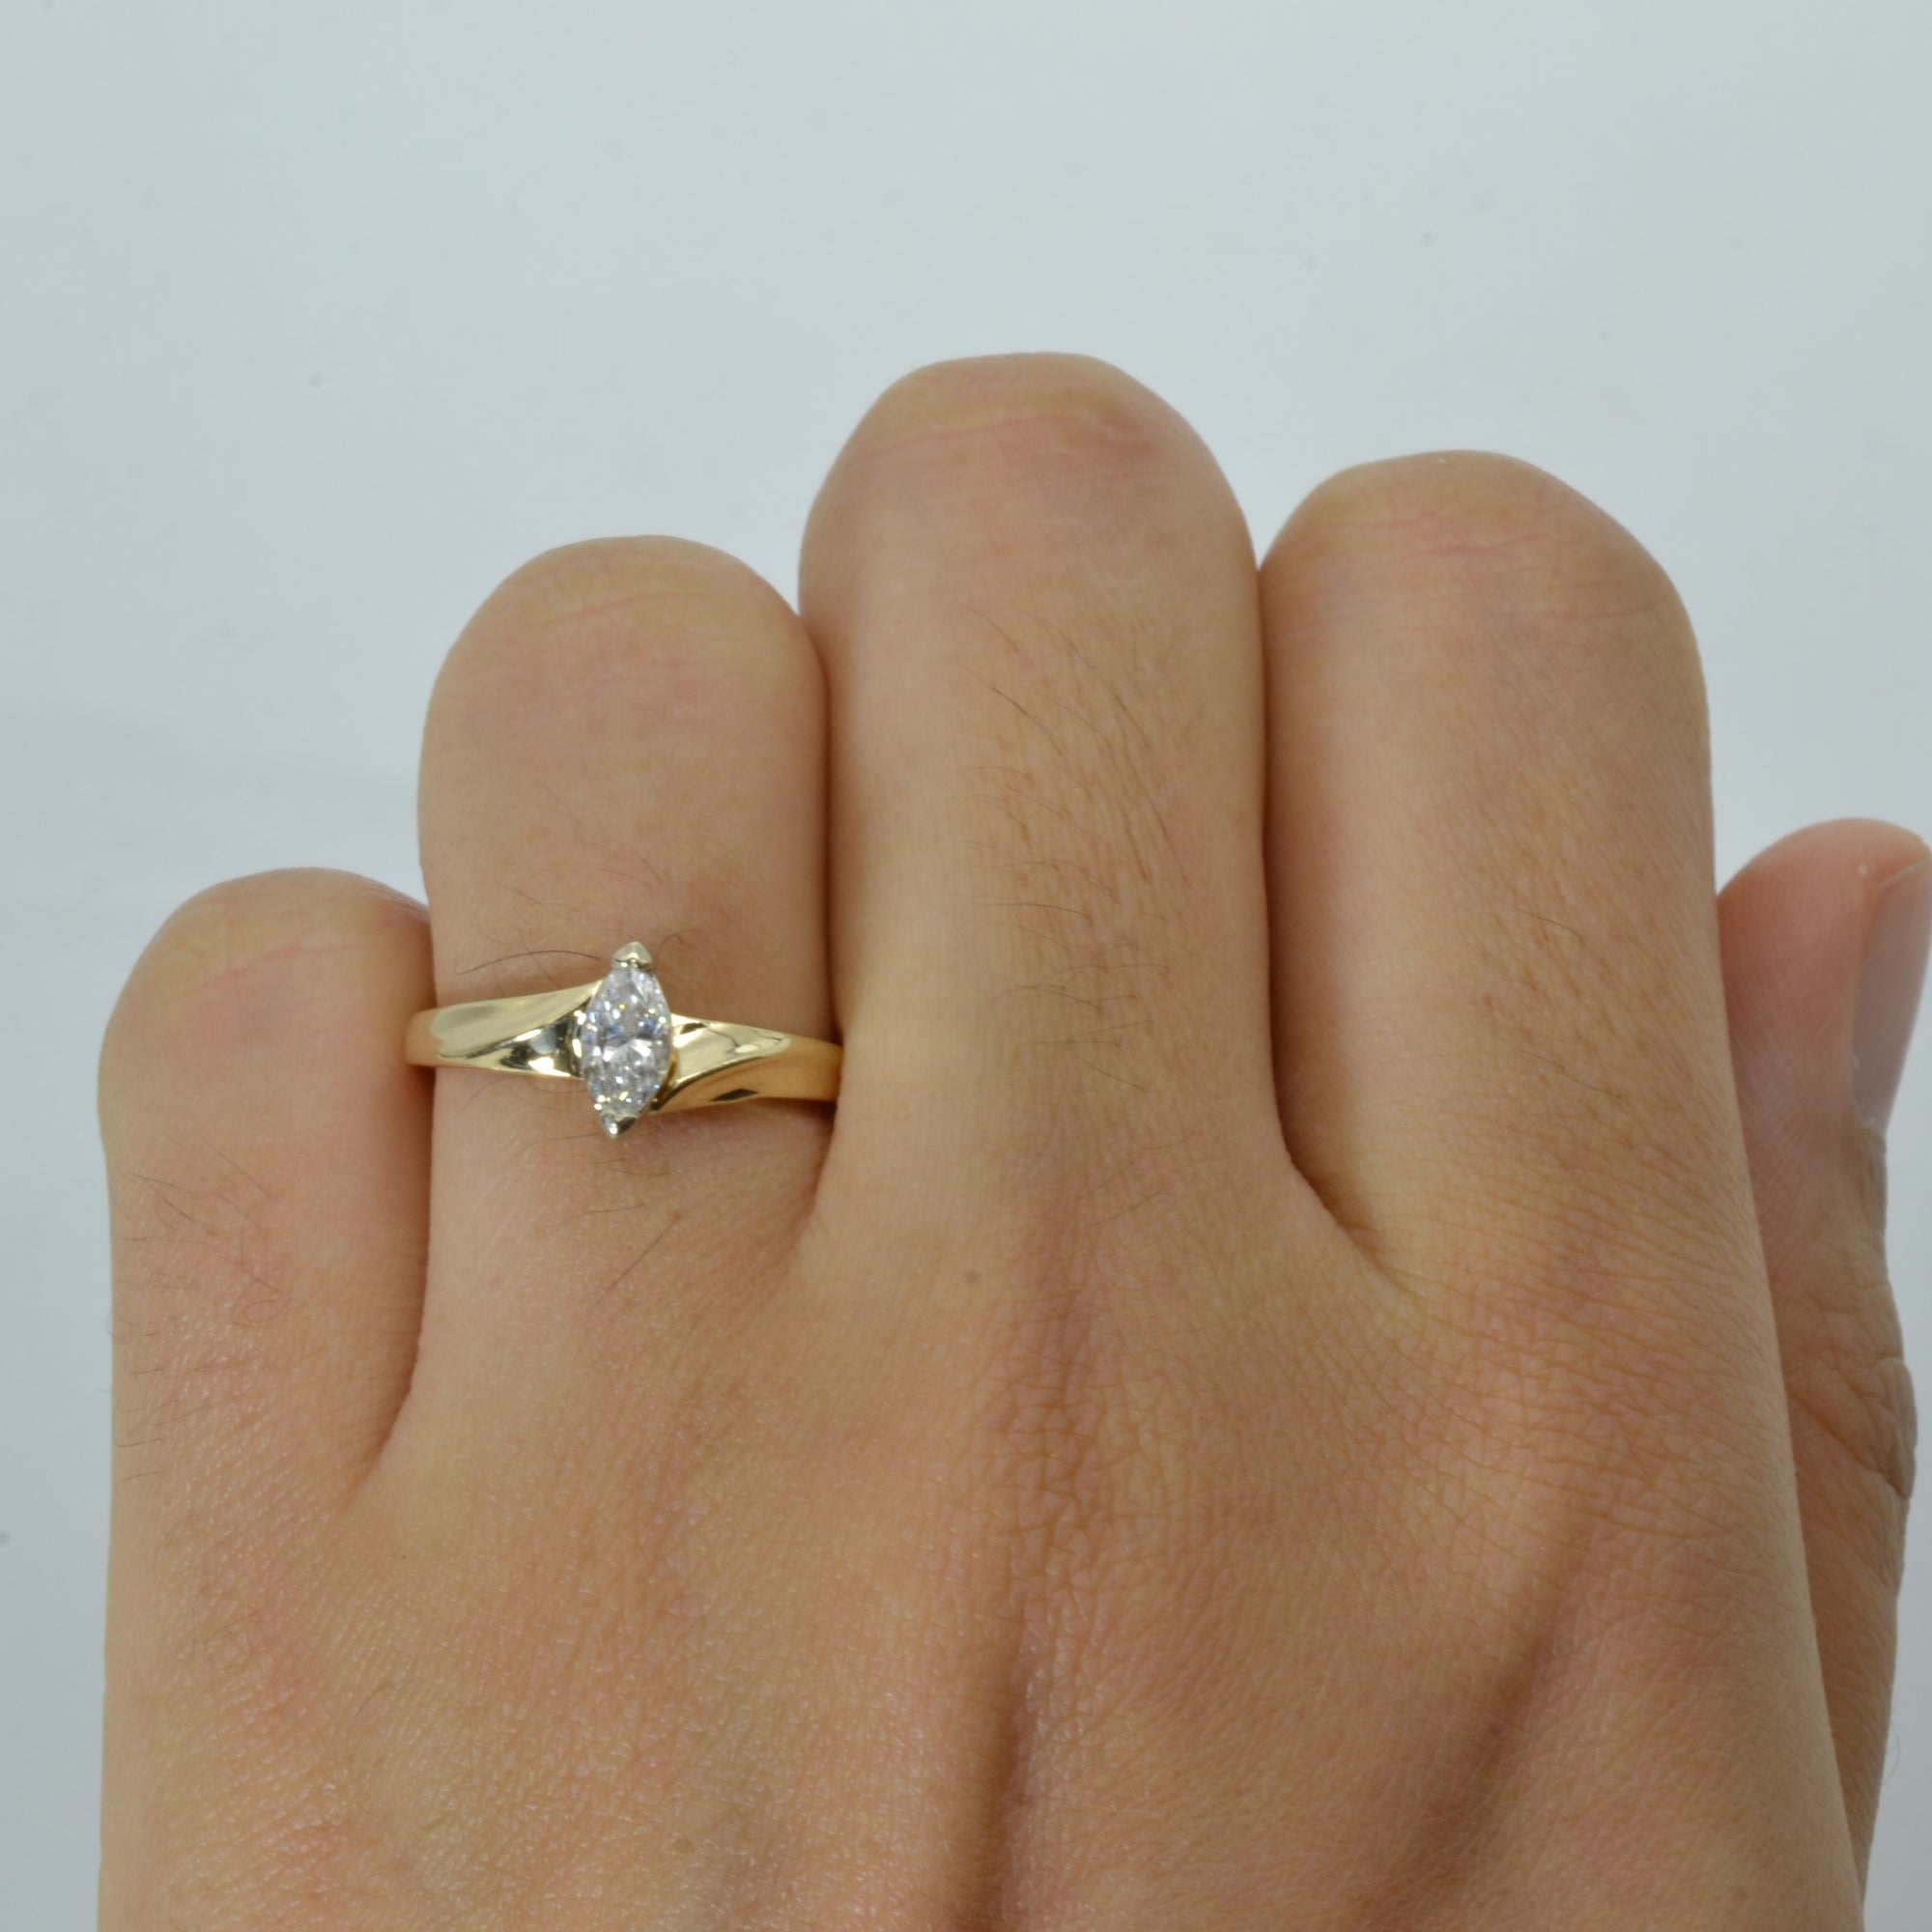 Solitaire Marquise Diamond Engagement Ring | 0.33ct | SZ 6.25 |